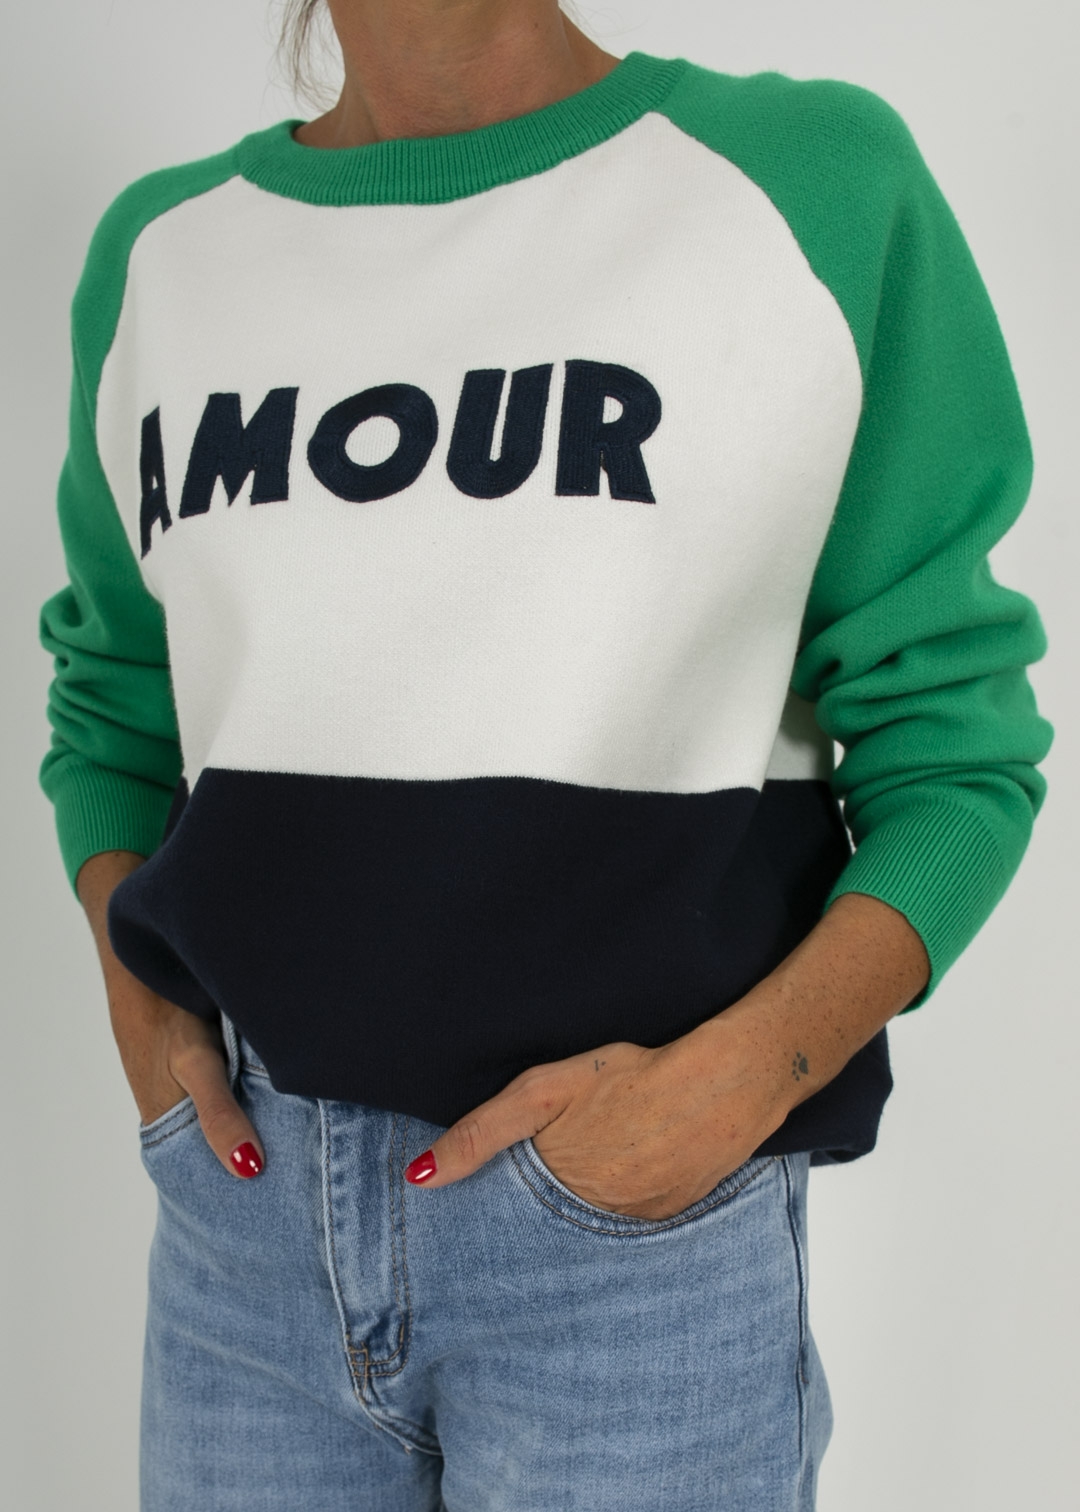 GREEN AMOUR SWEATER